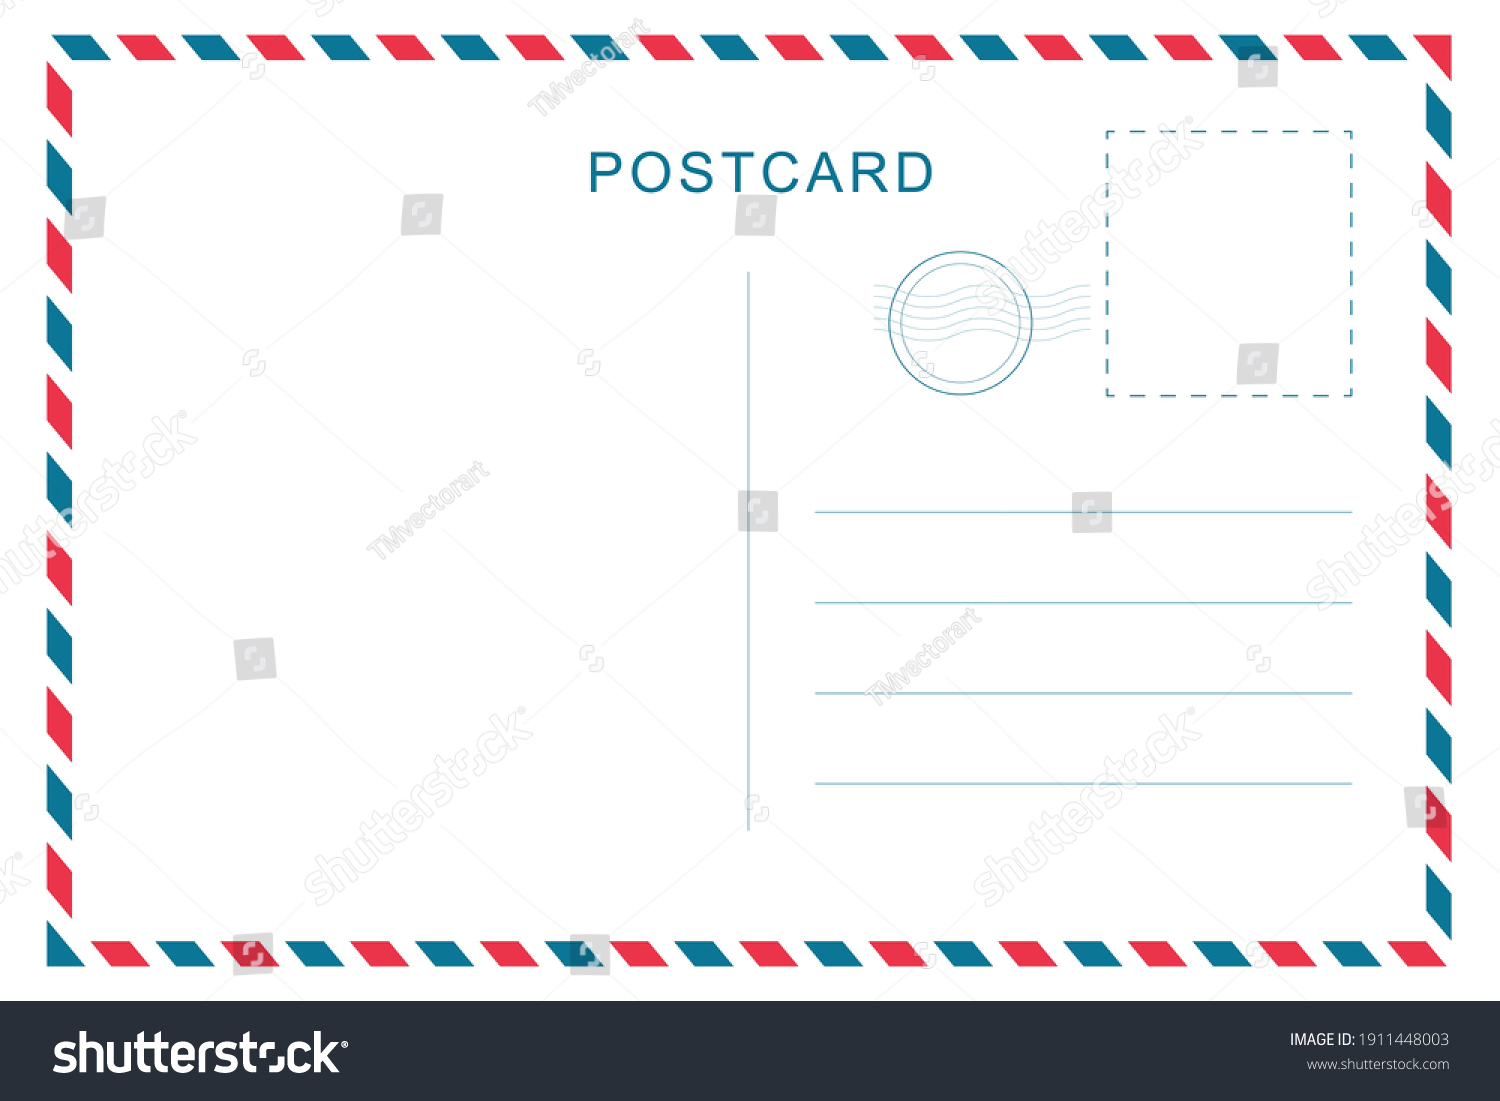 Vintage Postcard White Paper Texture Travel Stock Vector (Royalty Free ...